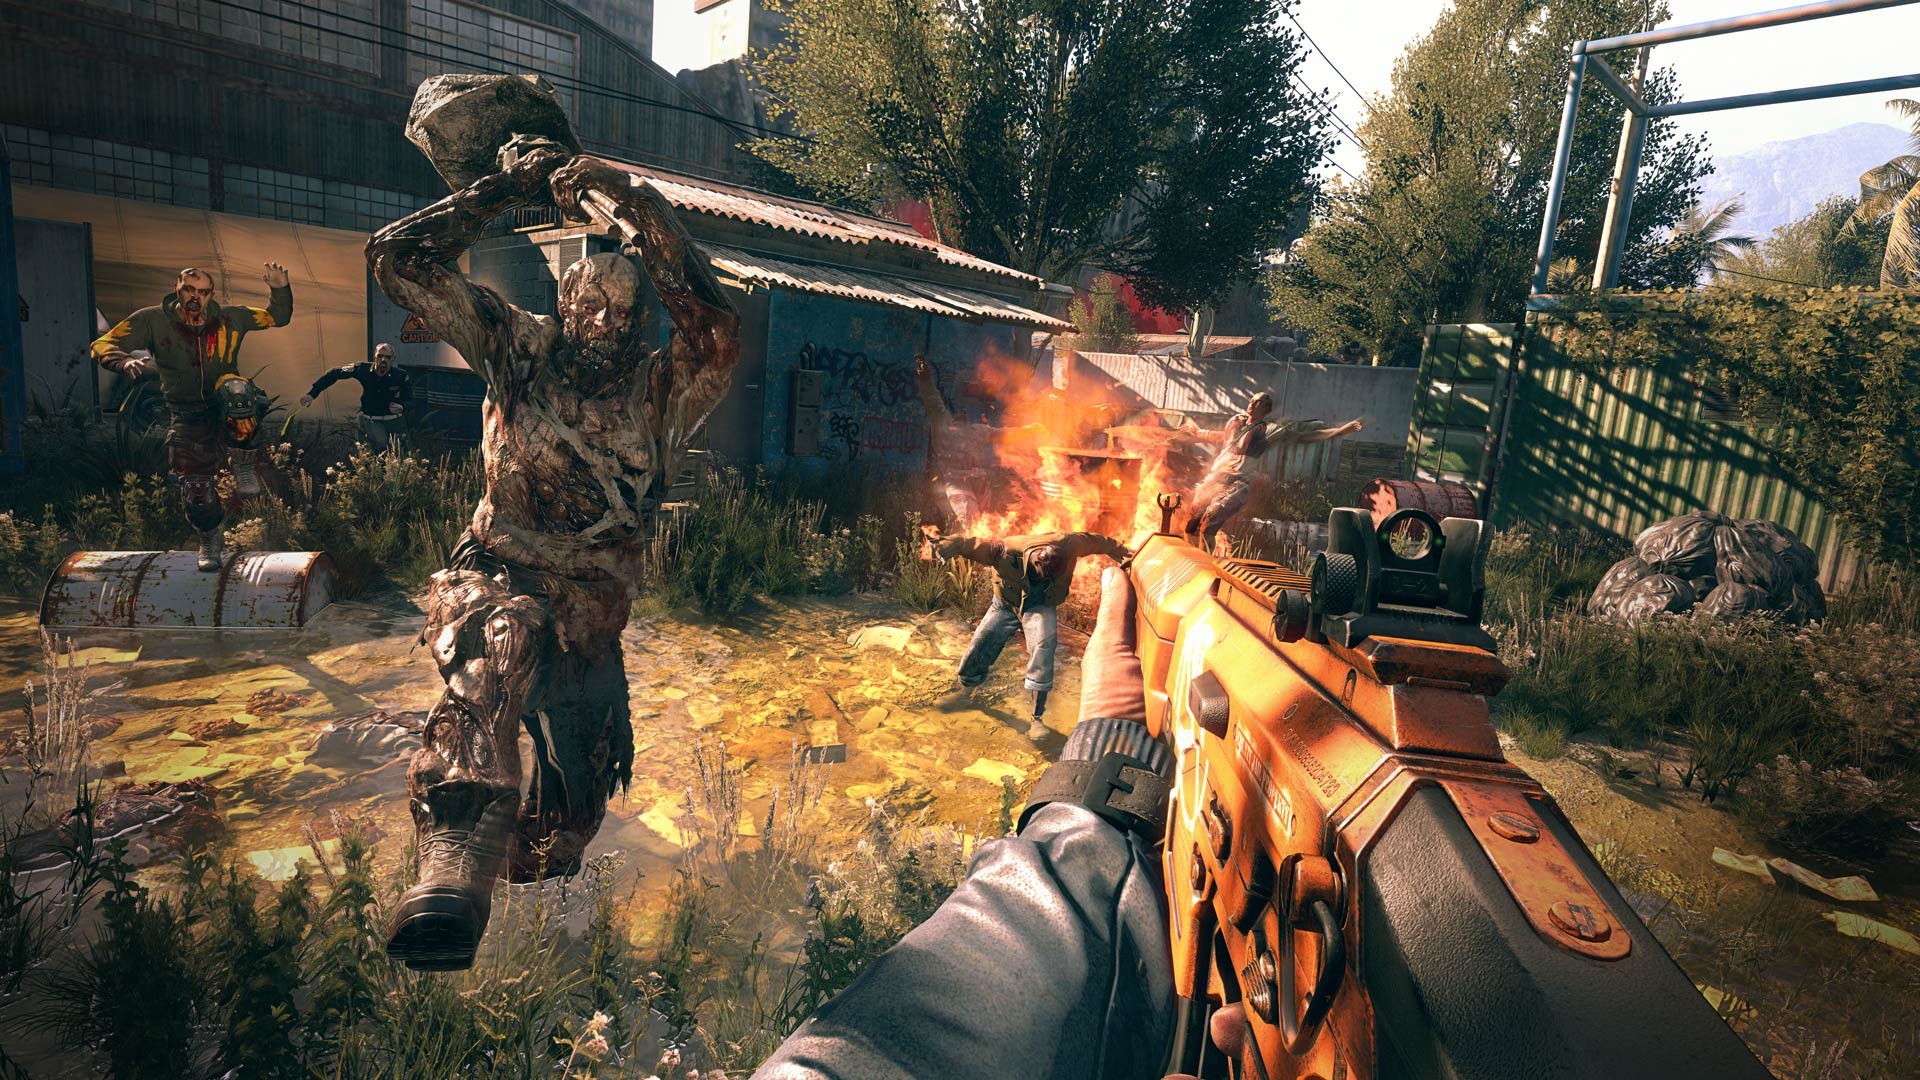 Dying Light: Definitive Edition Gameplay Review 